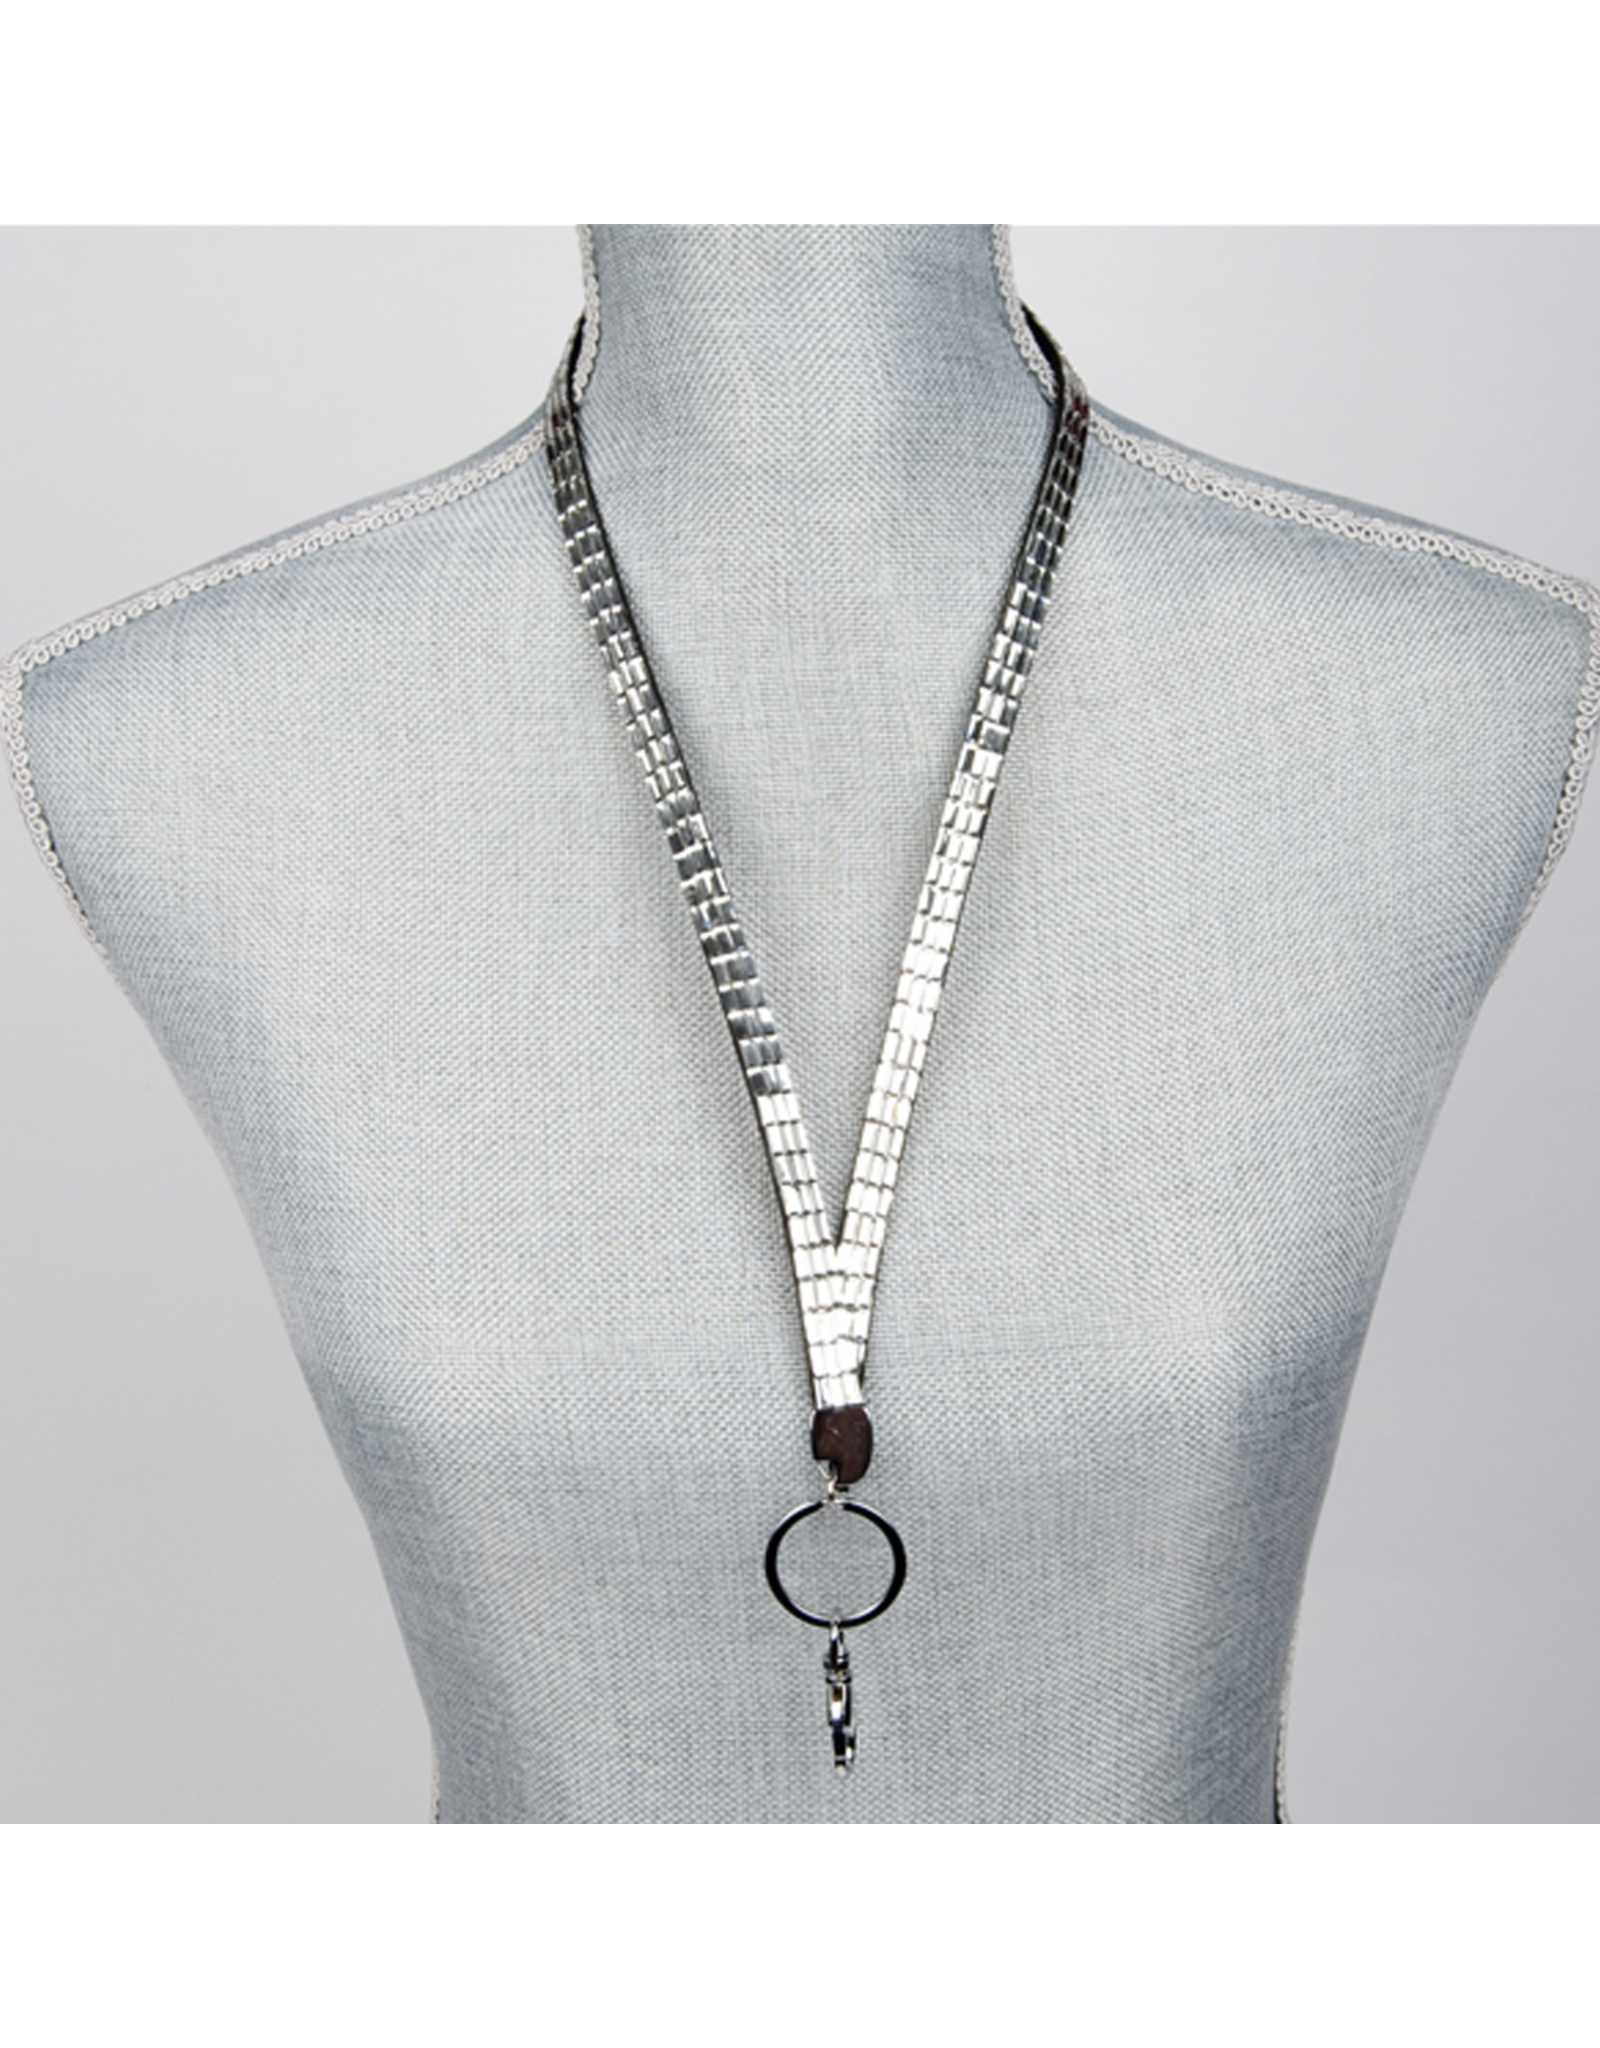 Jacqueline Kent Jewelry Crystal Bling Lanyard Silver